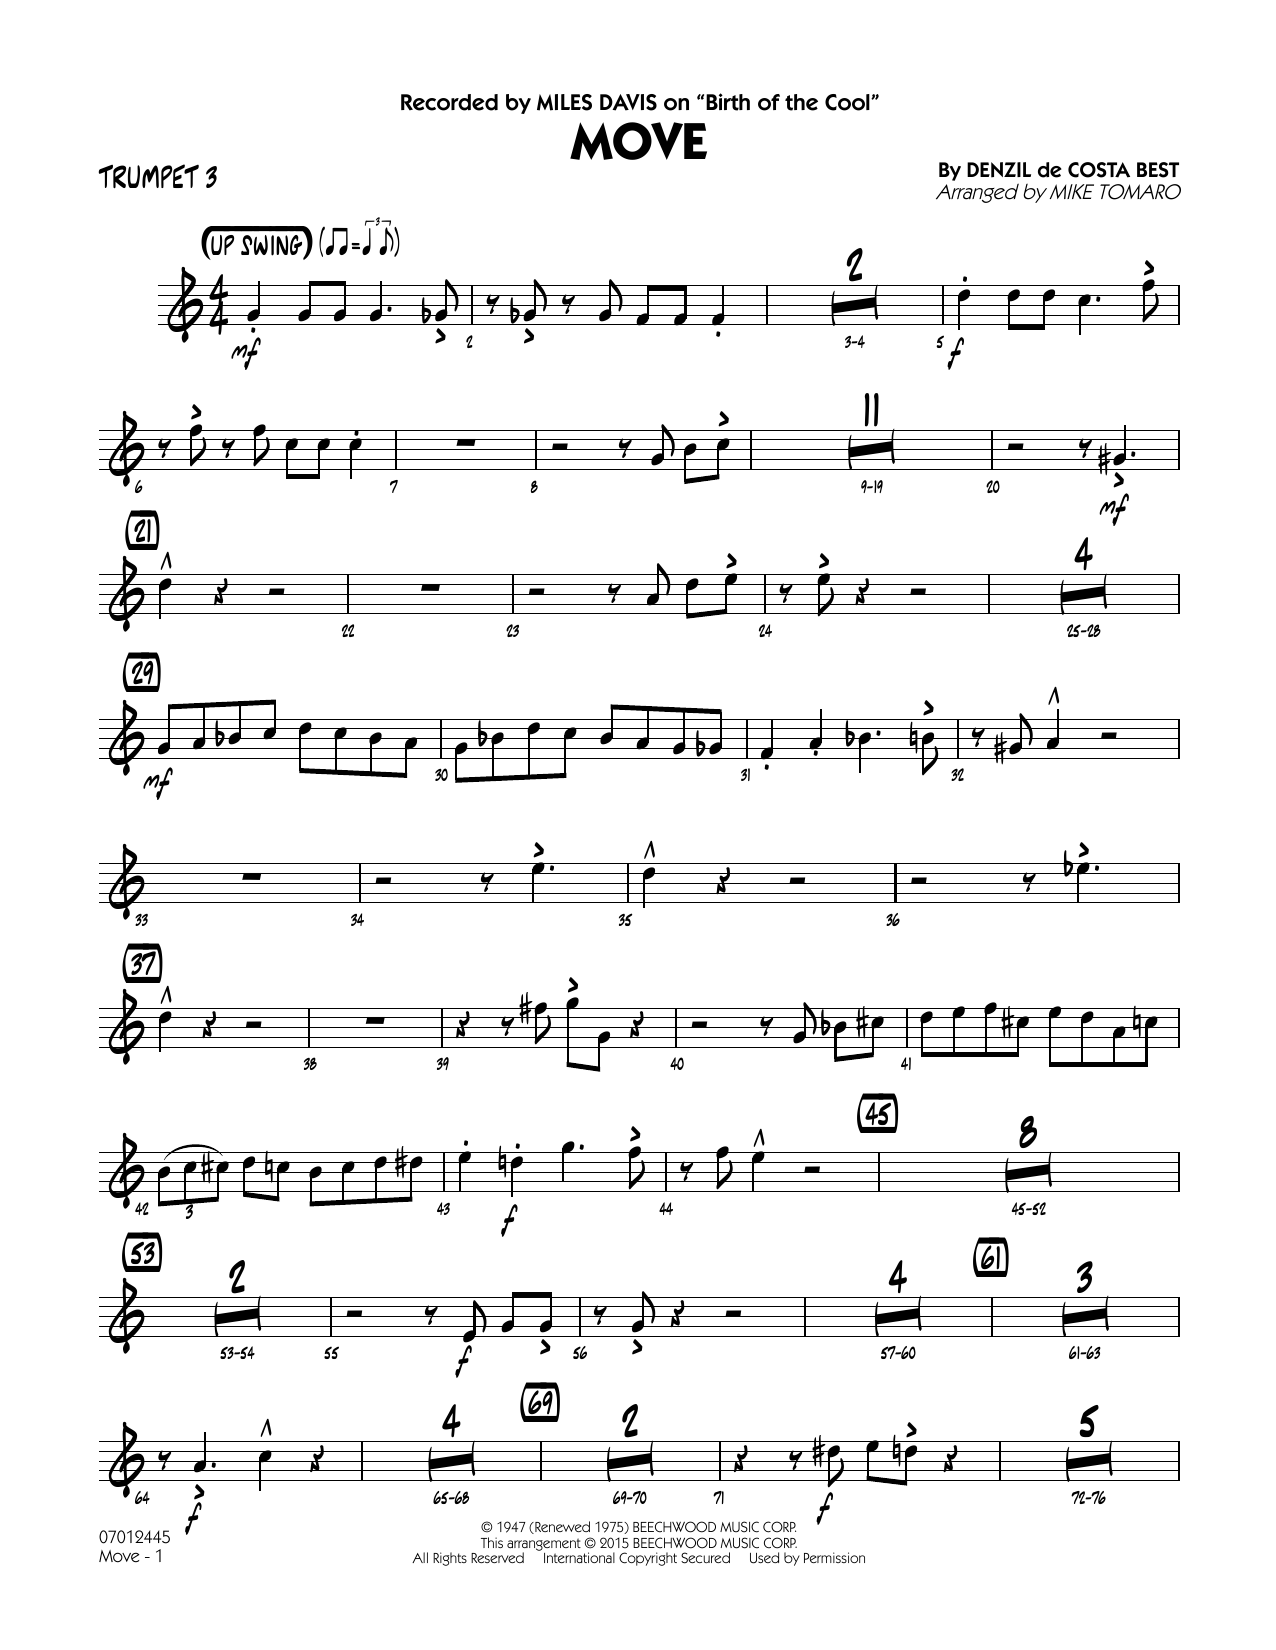 Mike Tomaro Move - Trumpet 3 sheet music notes and chords. Download Printable PDF.